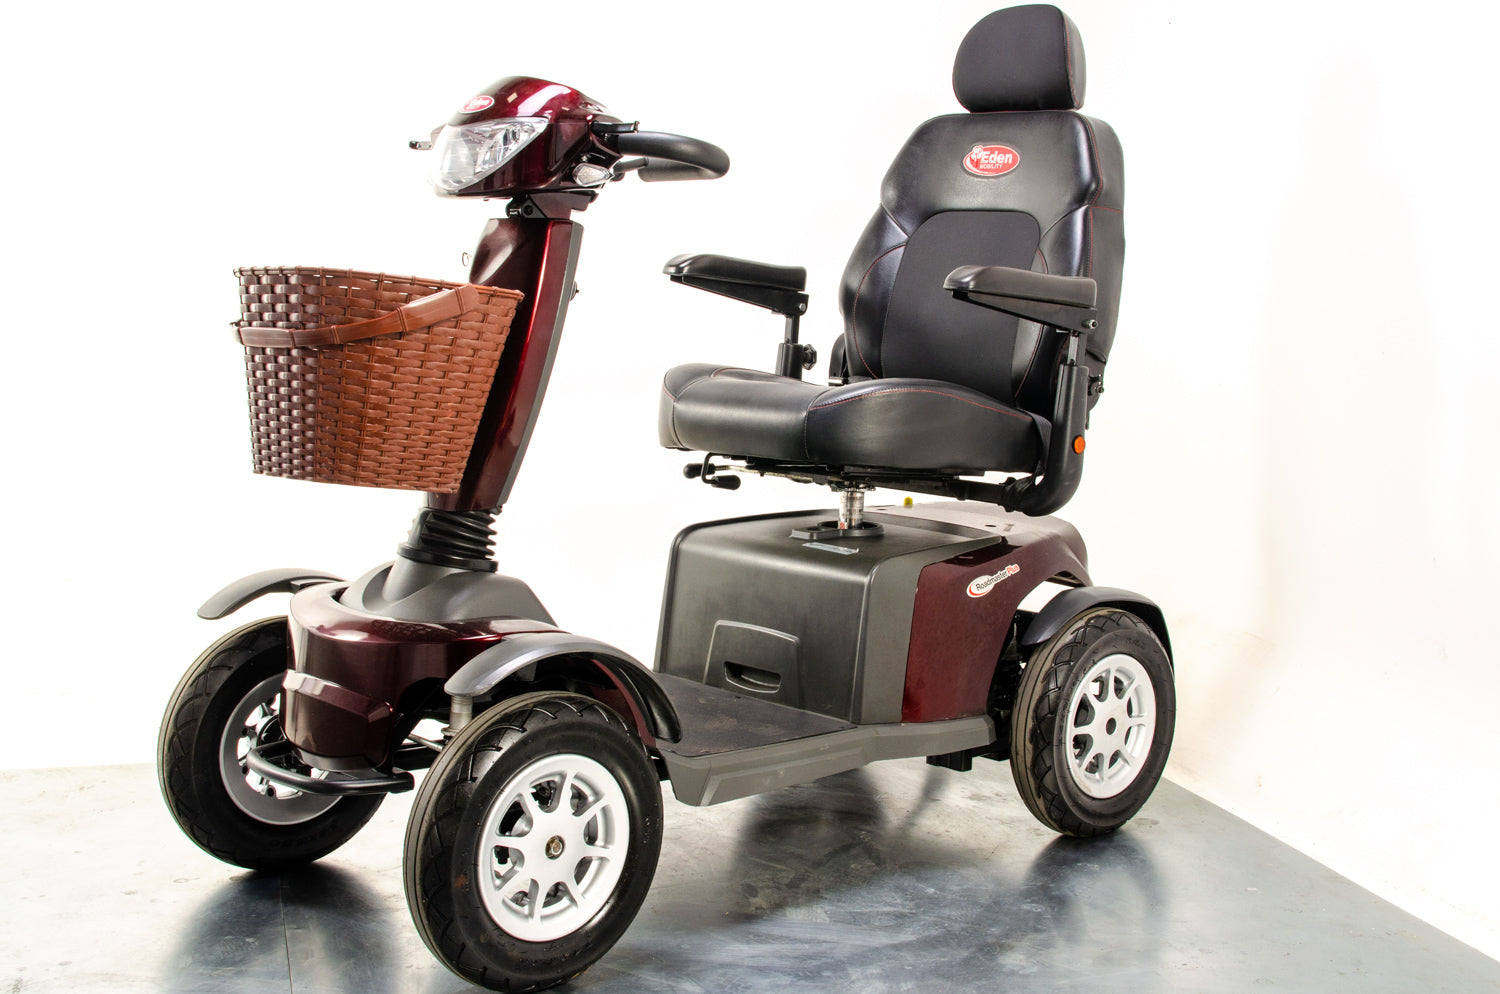 Eden Roadmaster Plus Used Mobility Scooter 8mph Large All Terrain Luxury Electric 13294